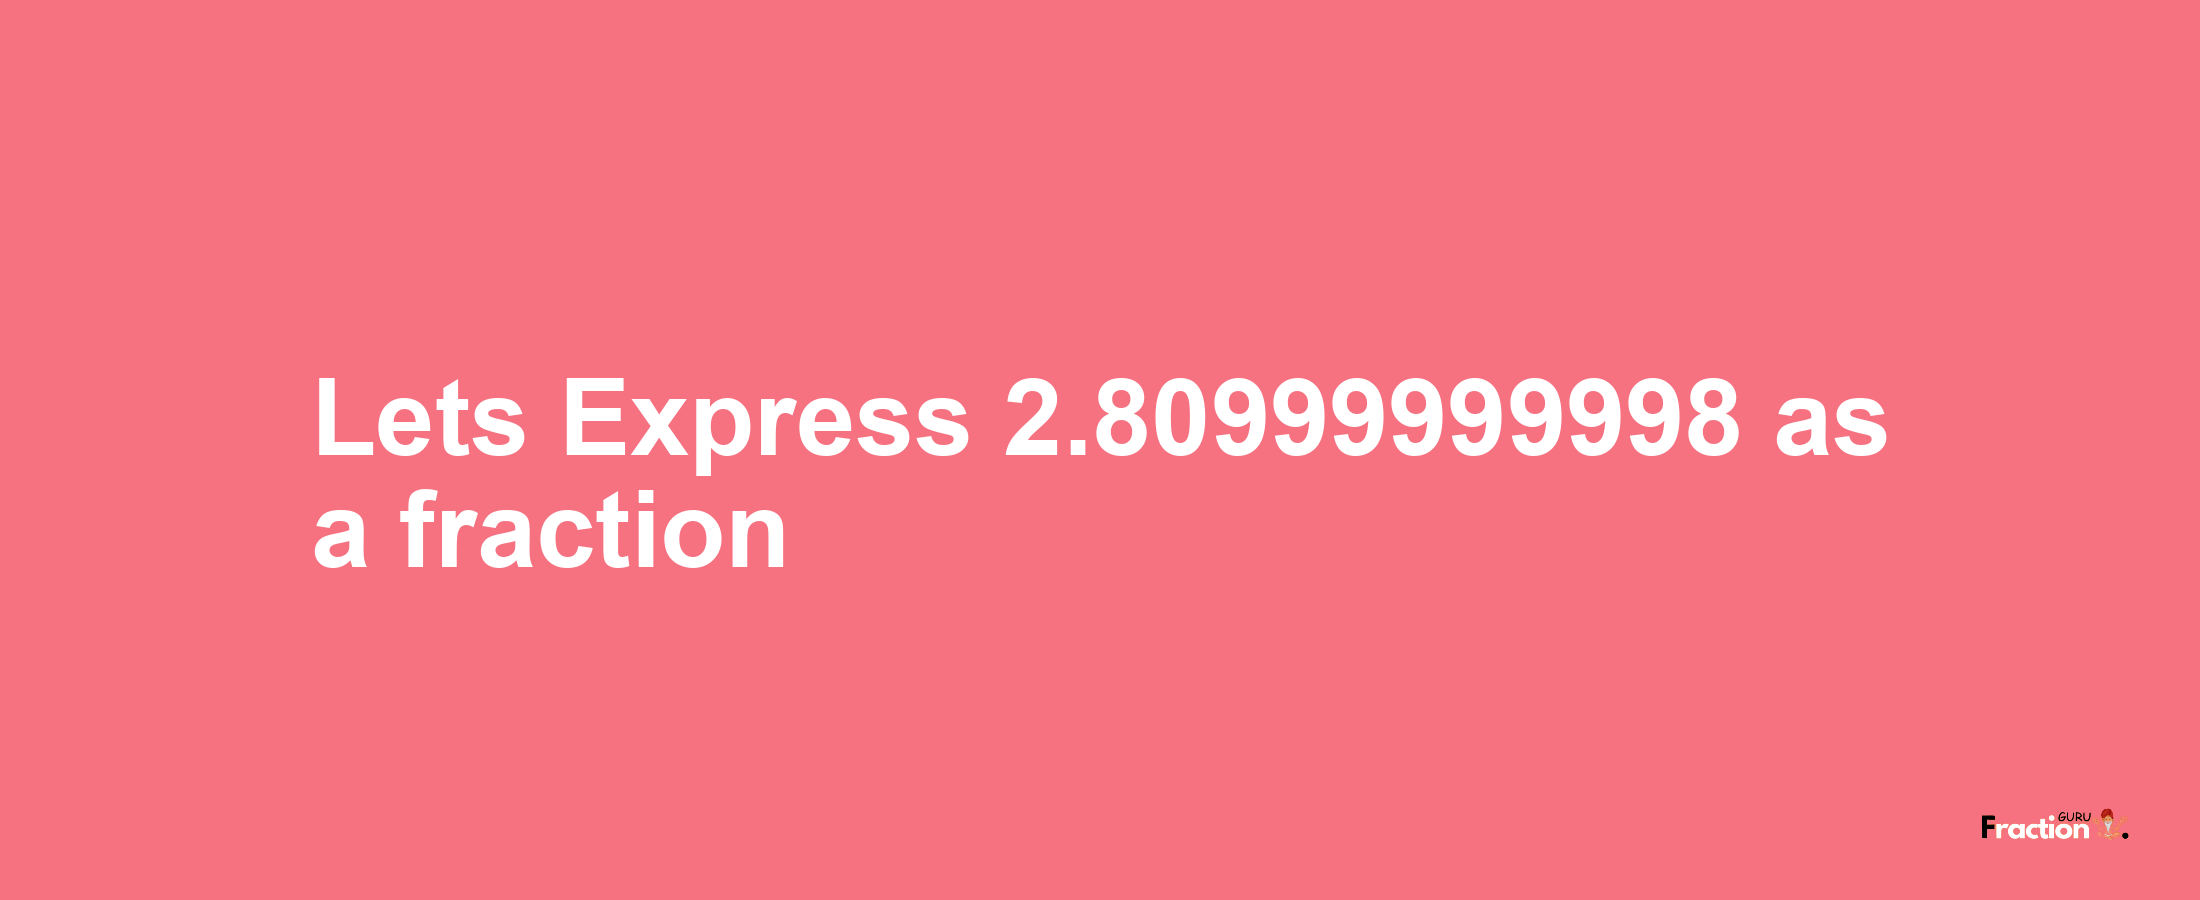 Lets Express 2.80999999998 as afraction